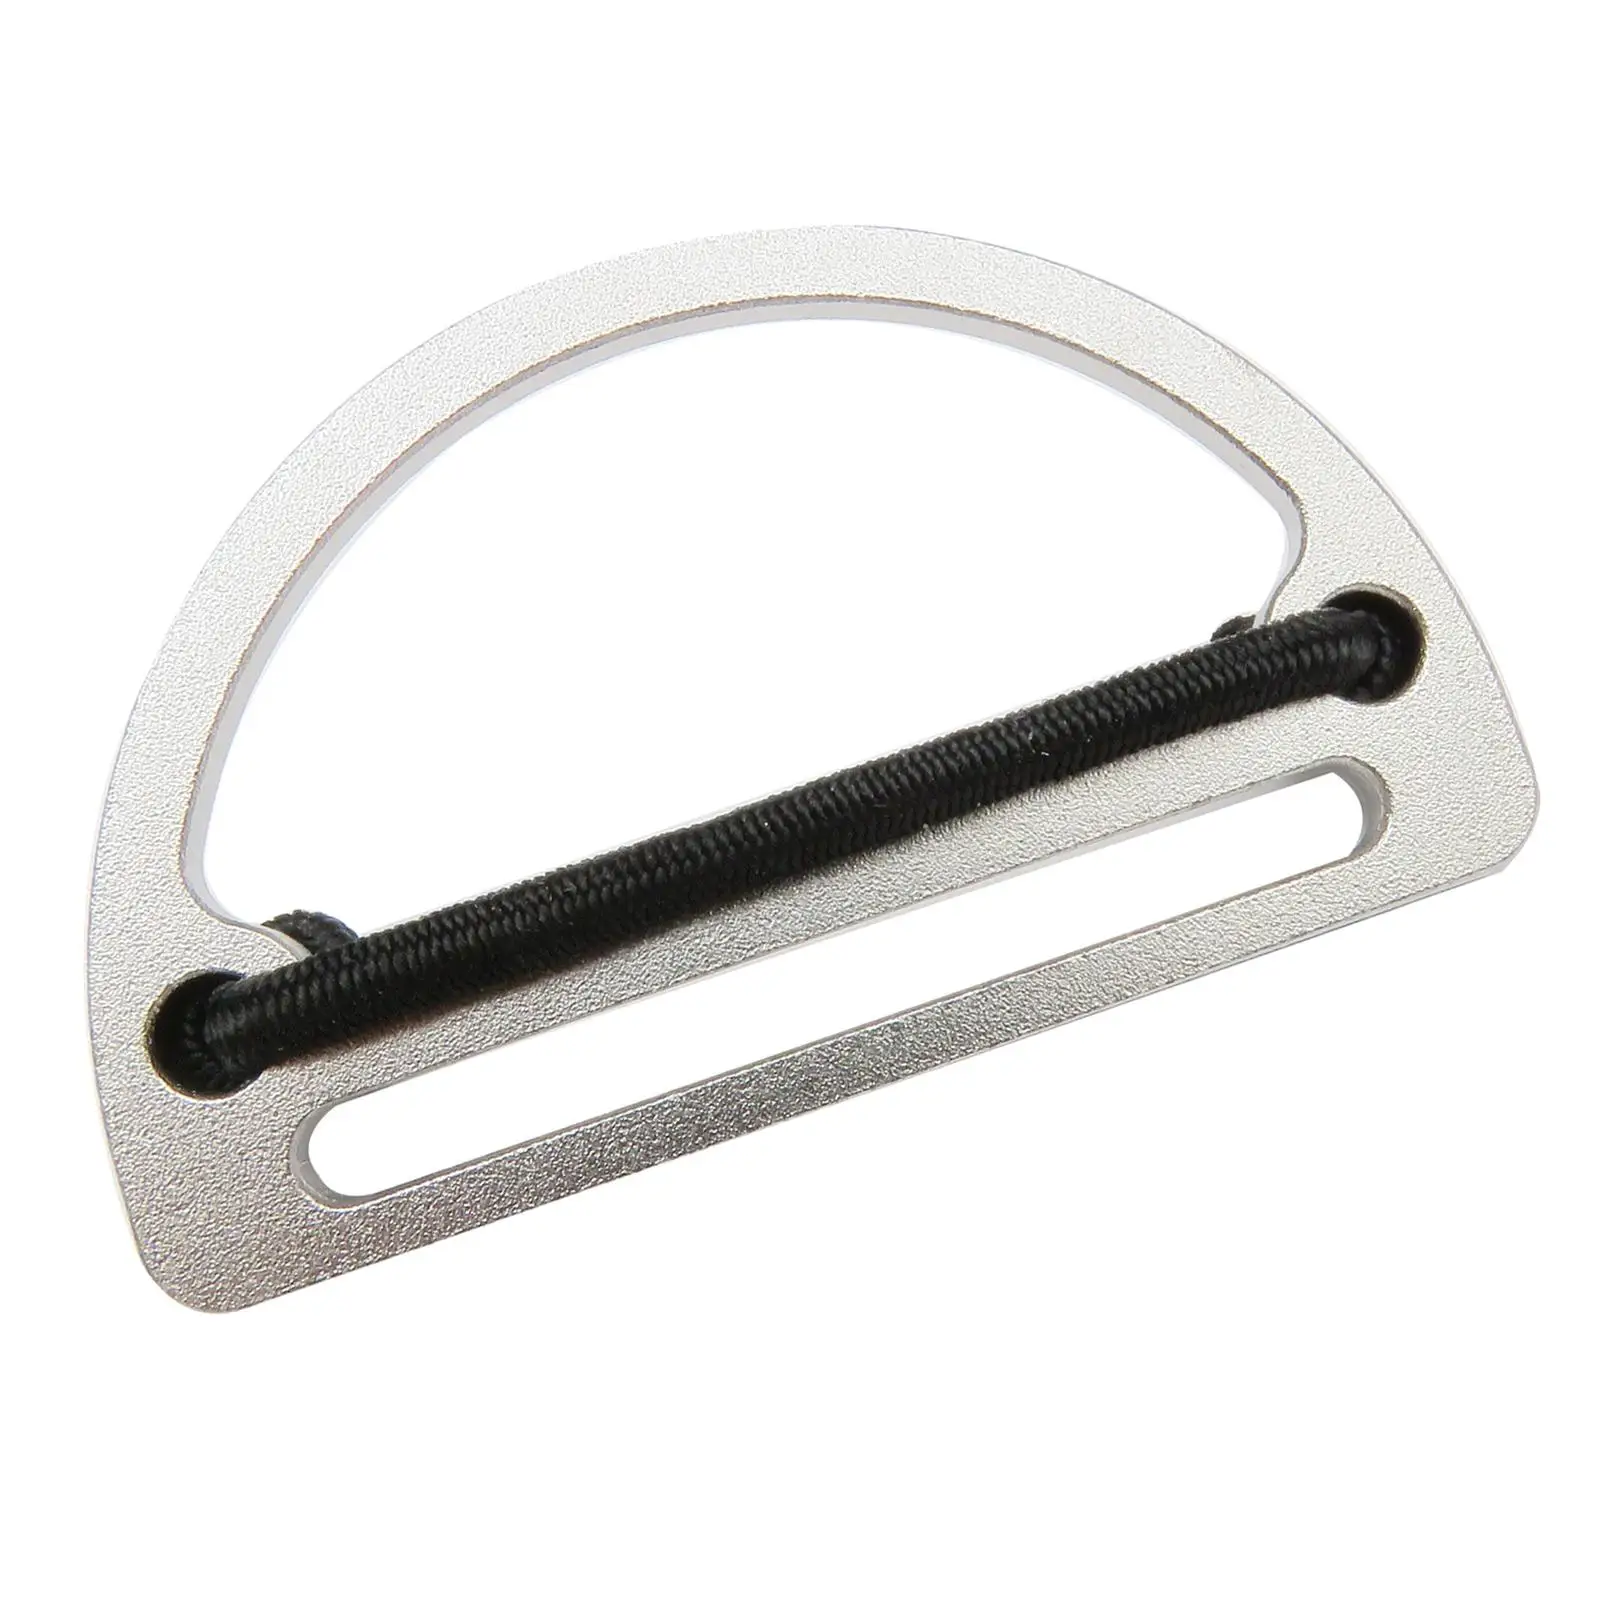 Stainless Steel Weight Belt Keeper D Ring System Buckle Retainer Silver for Webbing Sport 5cm Weight Belt Surfing Scuba Diving